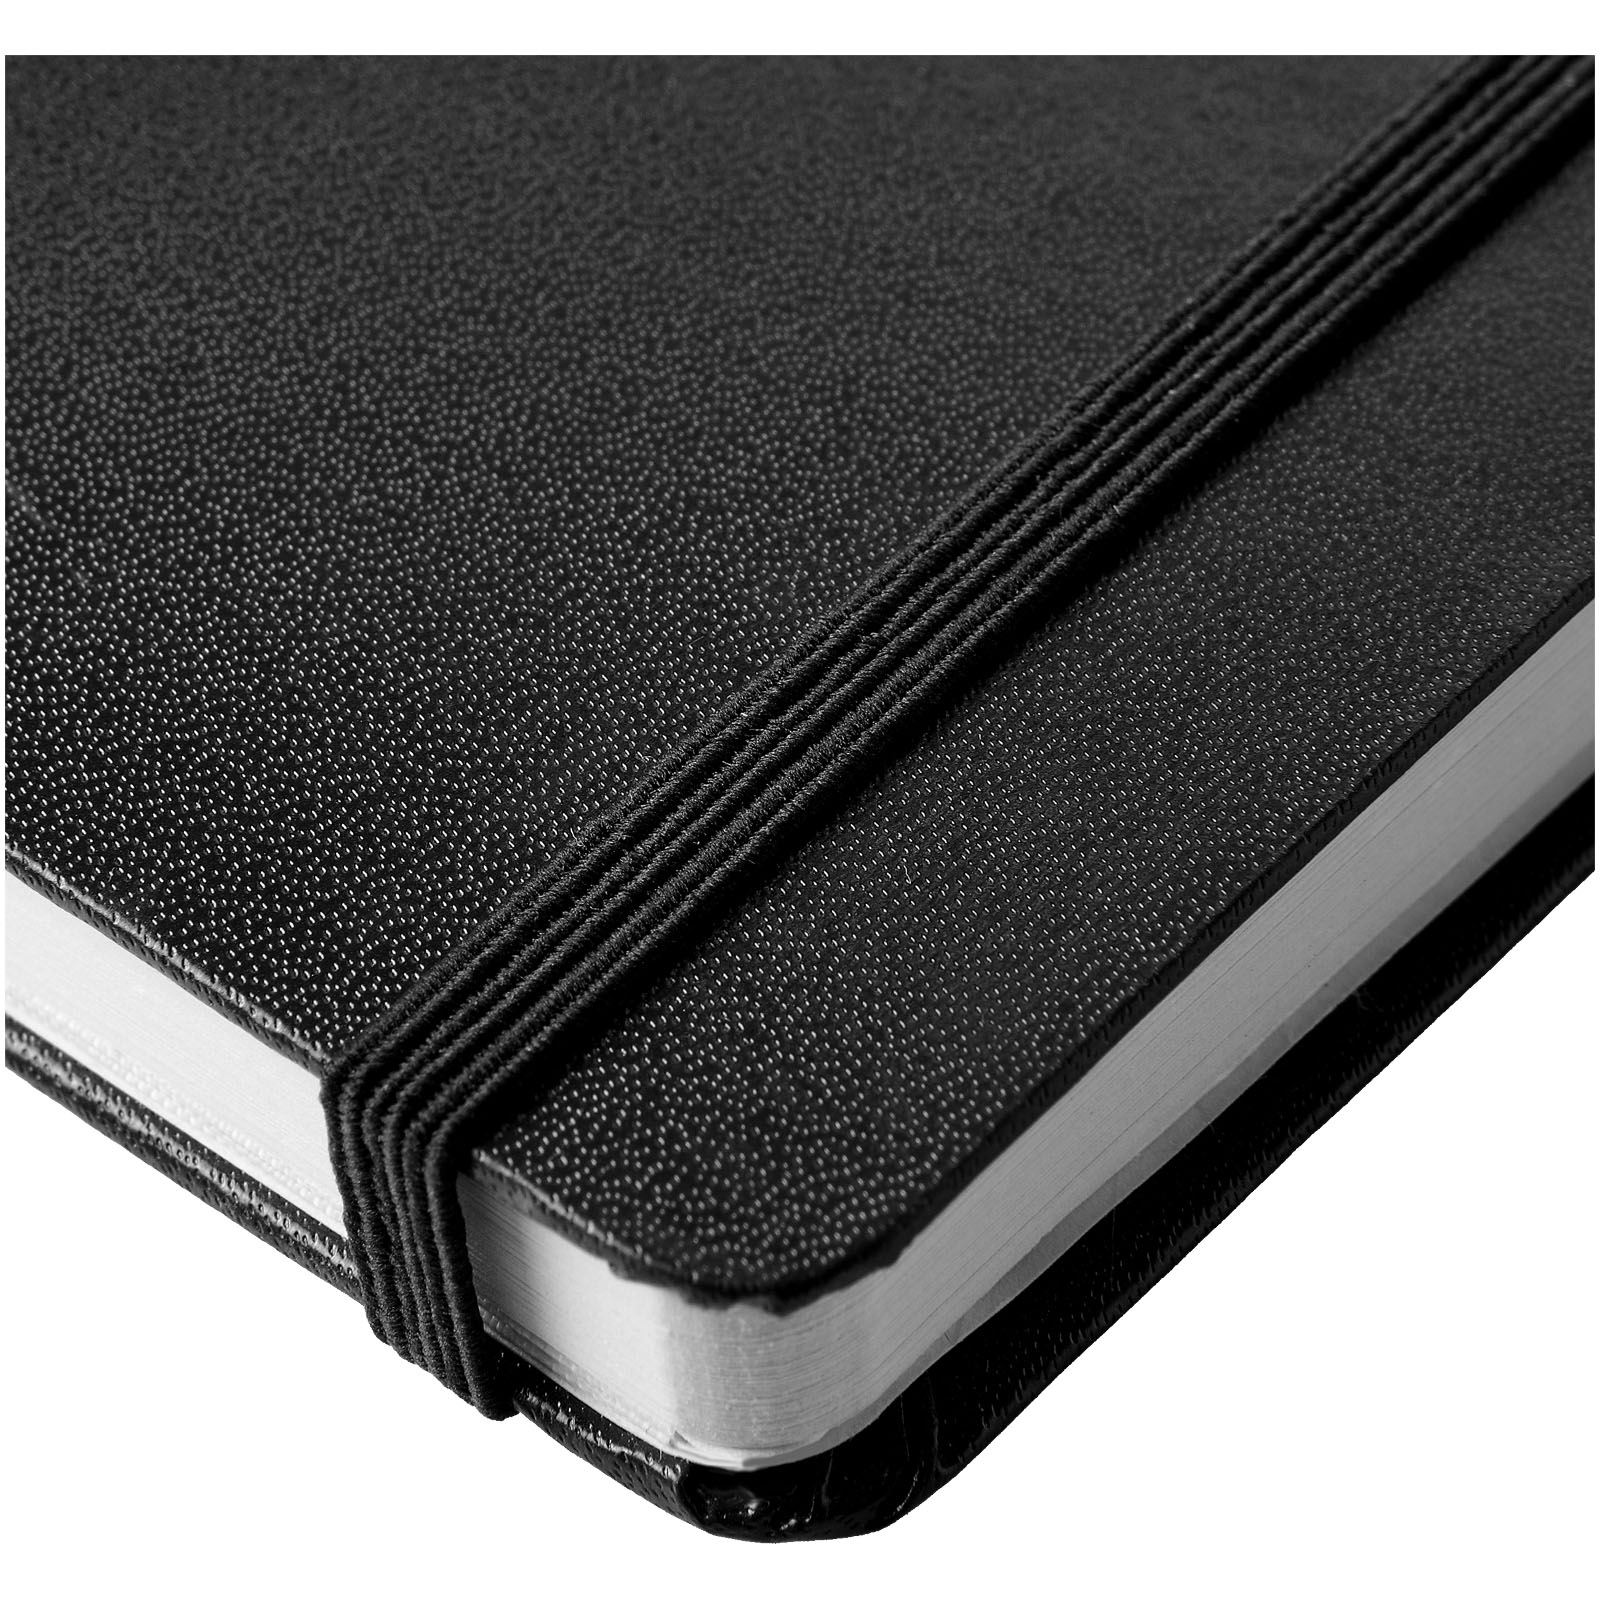 Advertising Hard cover notebooks - Classic A6 hard cover pocket notebook - 5